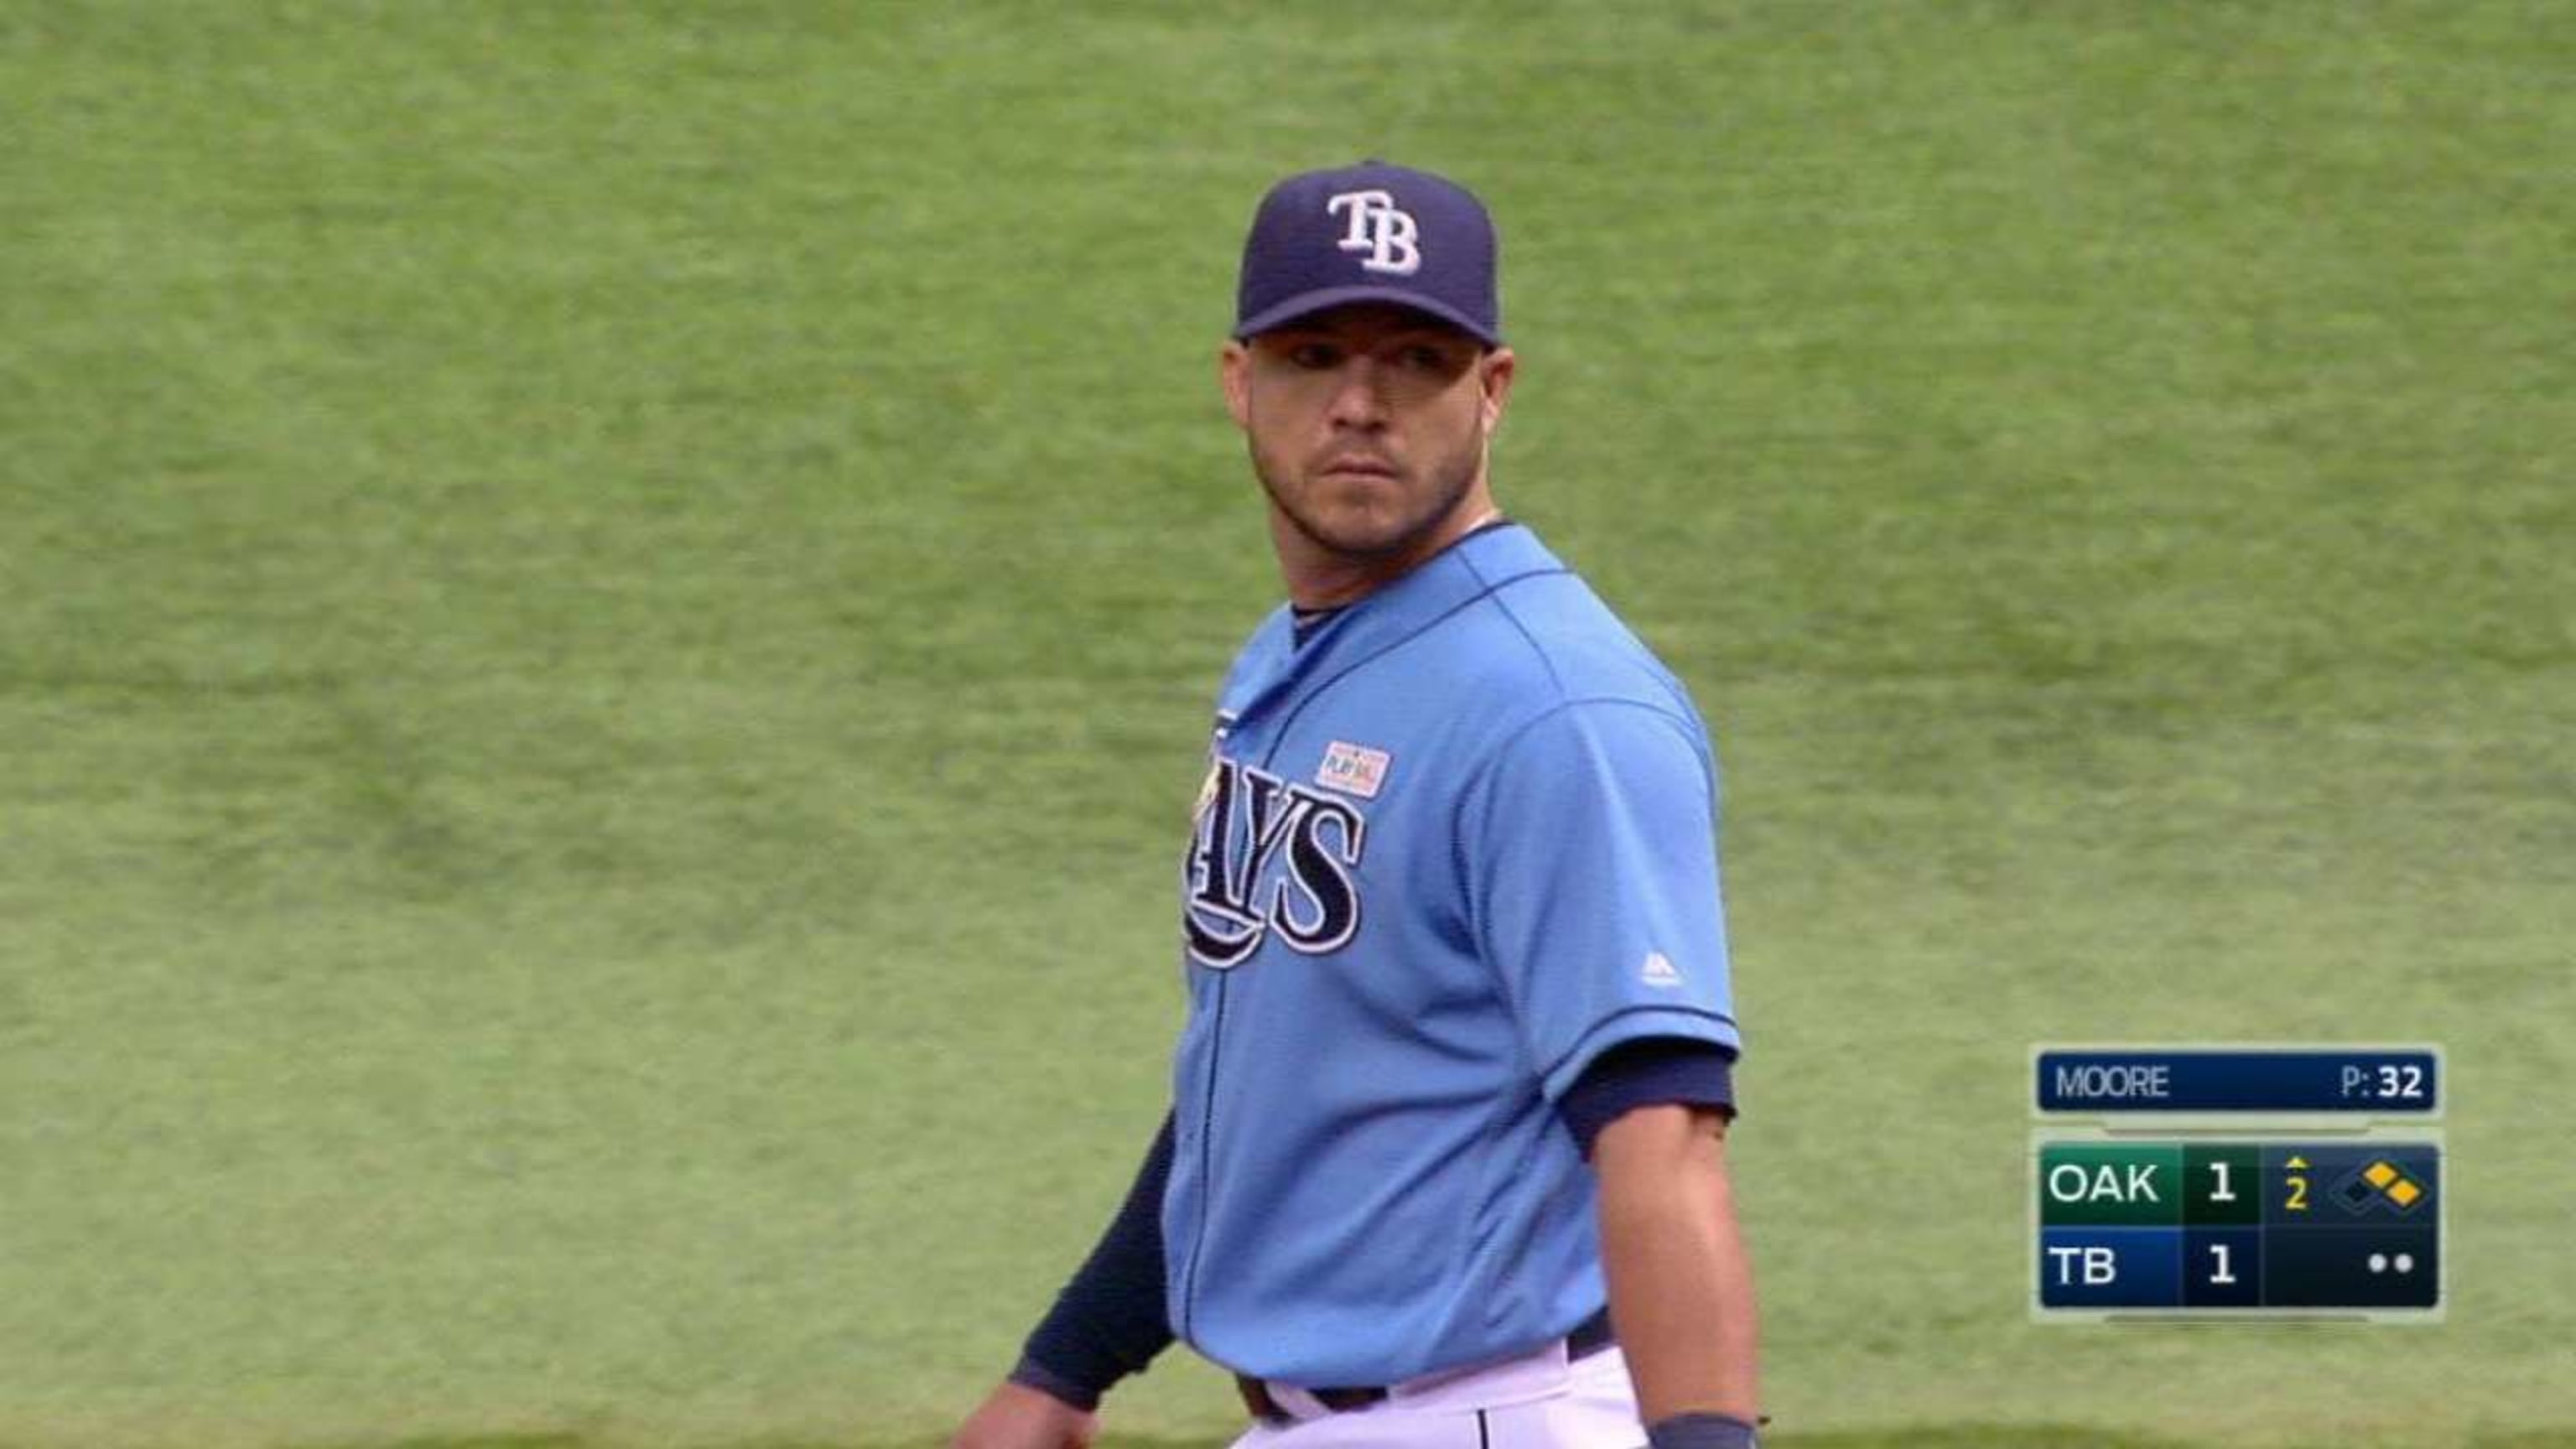 Steve Pearce conquered the Tropicana Field catwalk and caught a